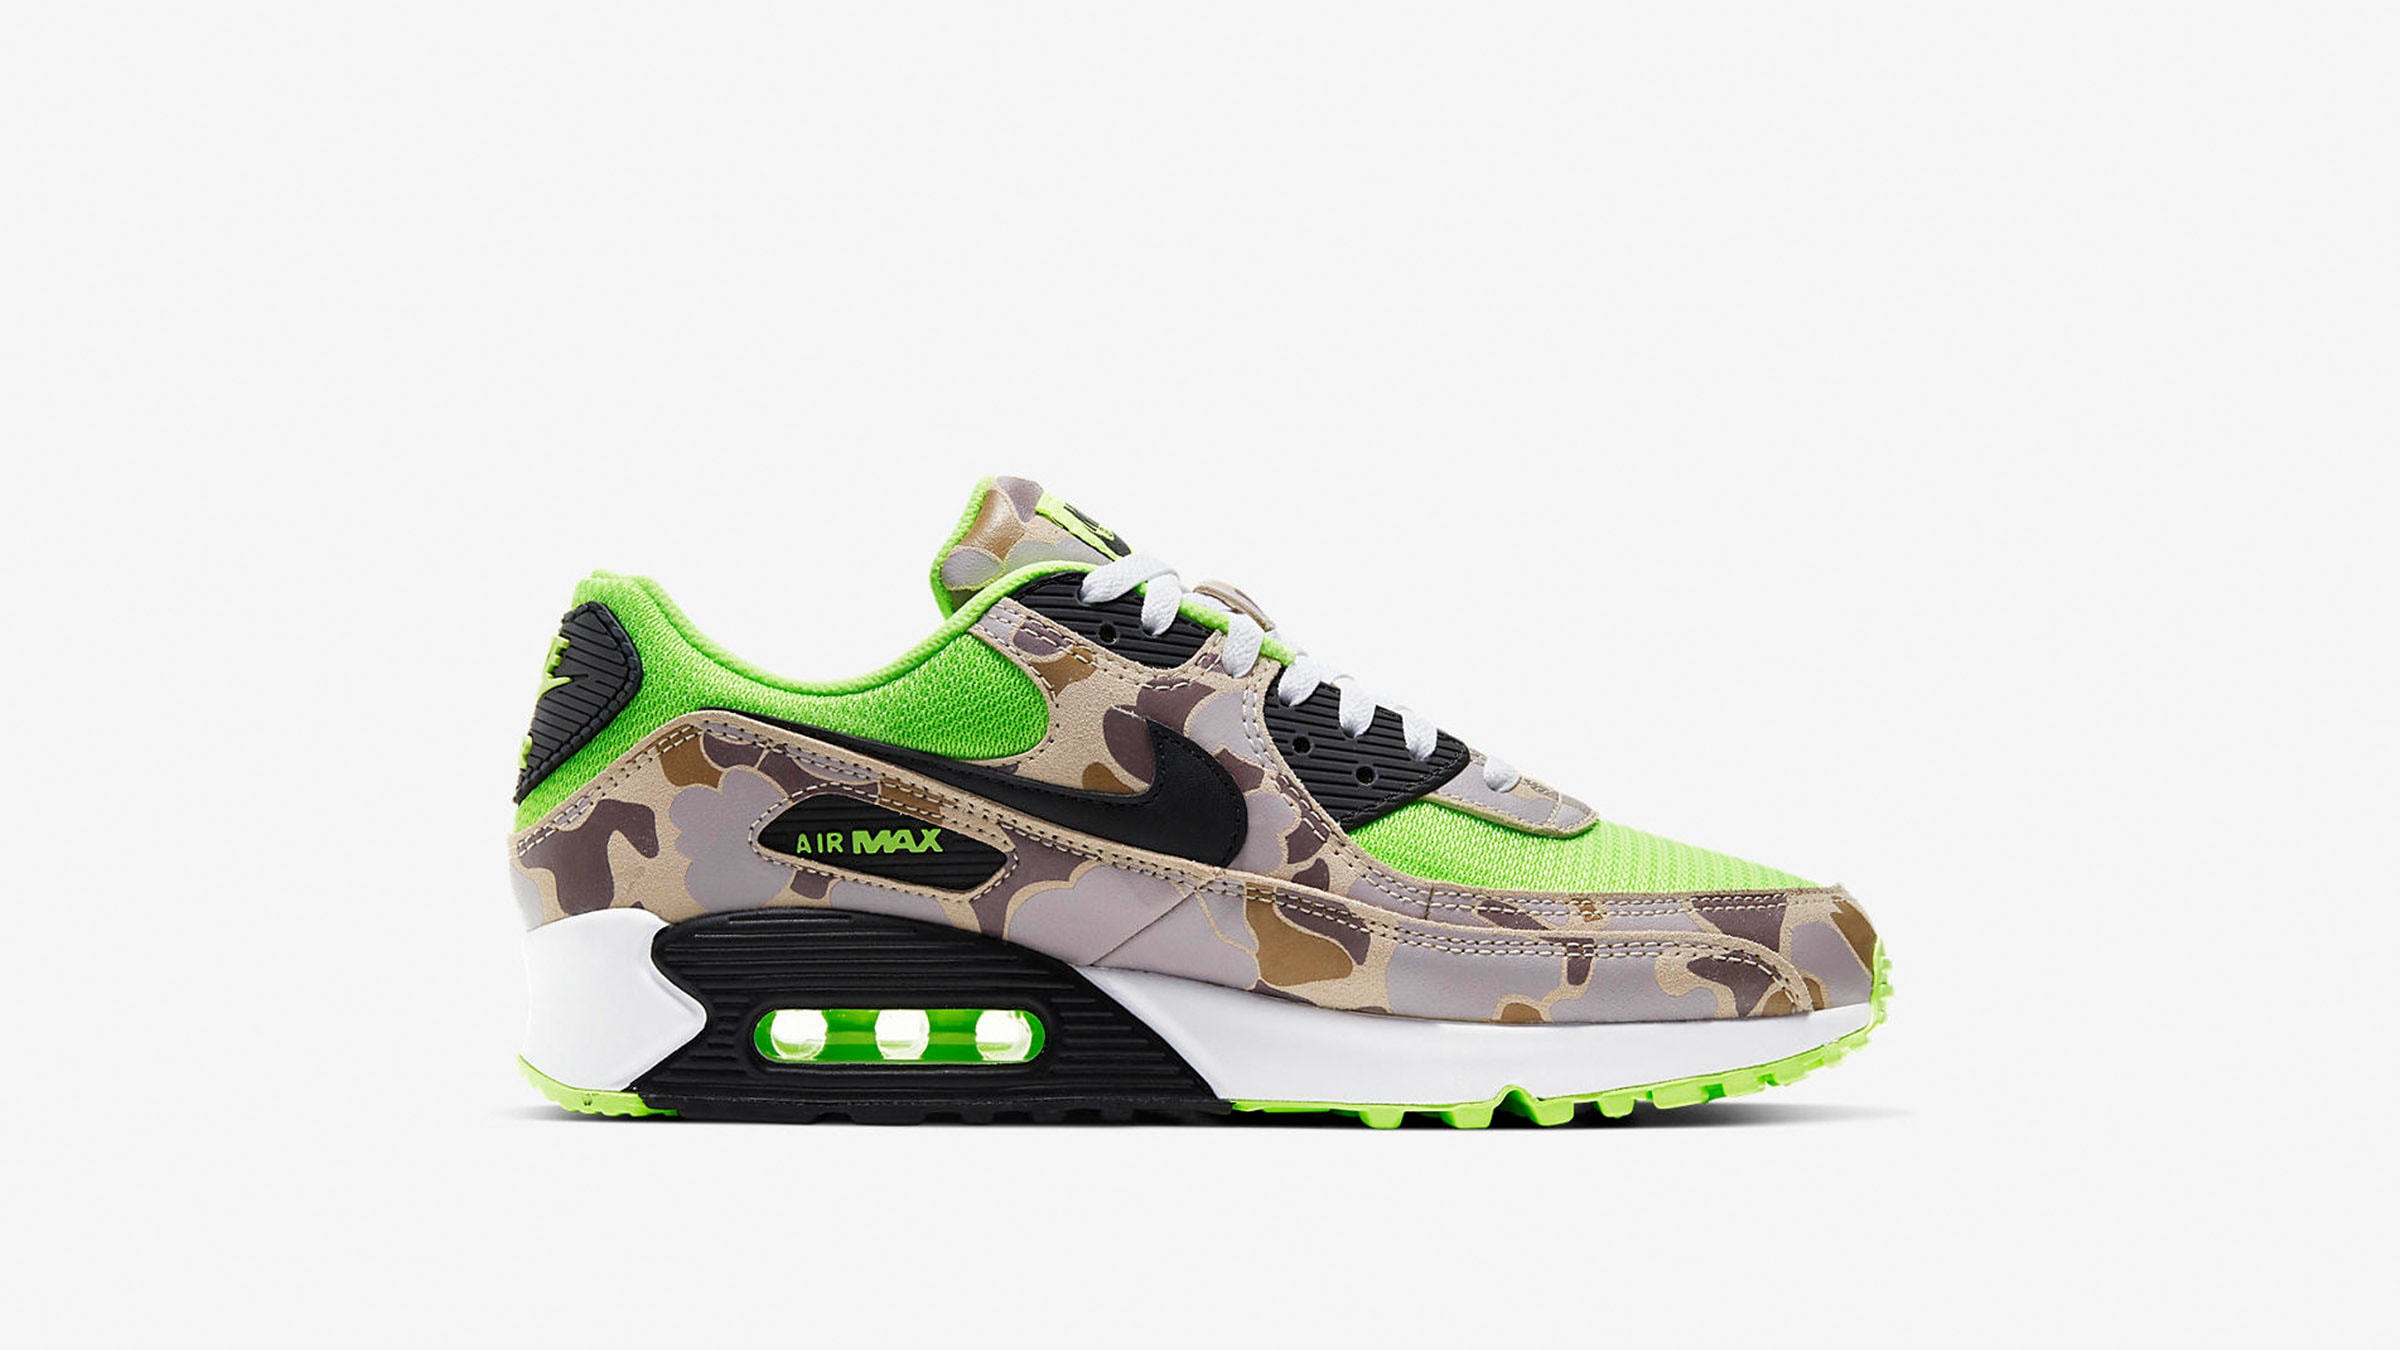 Nike Air Max 90 SP (Ghost Green & Black) | END. Launches